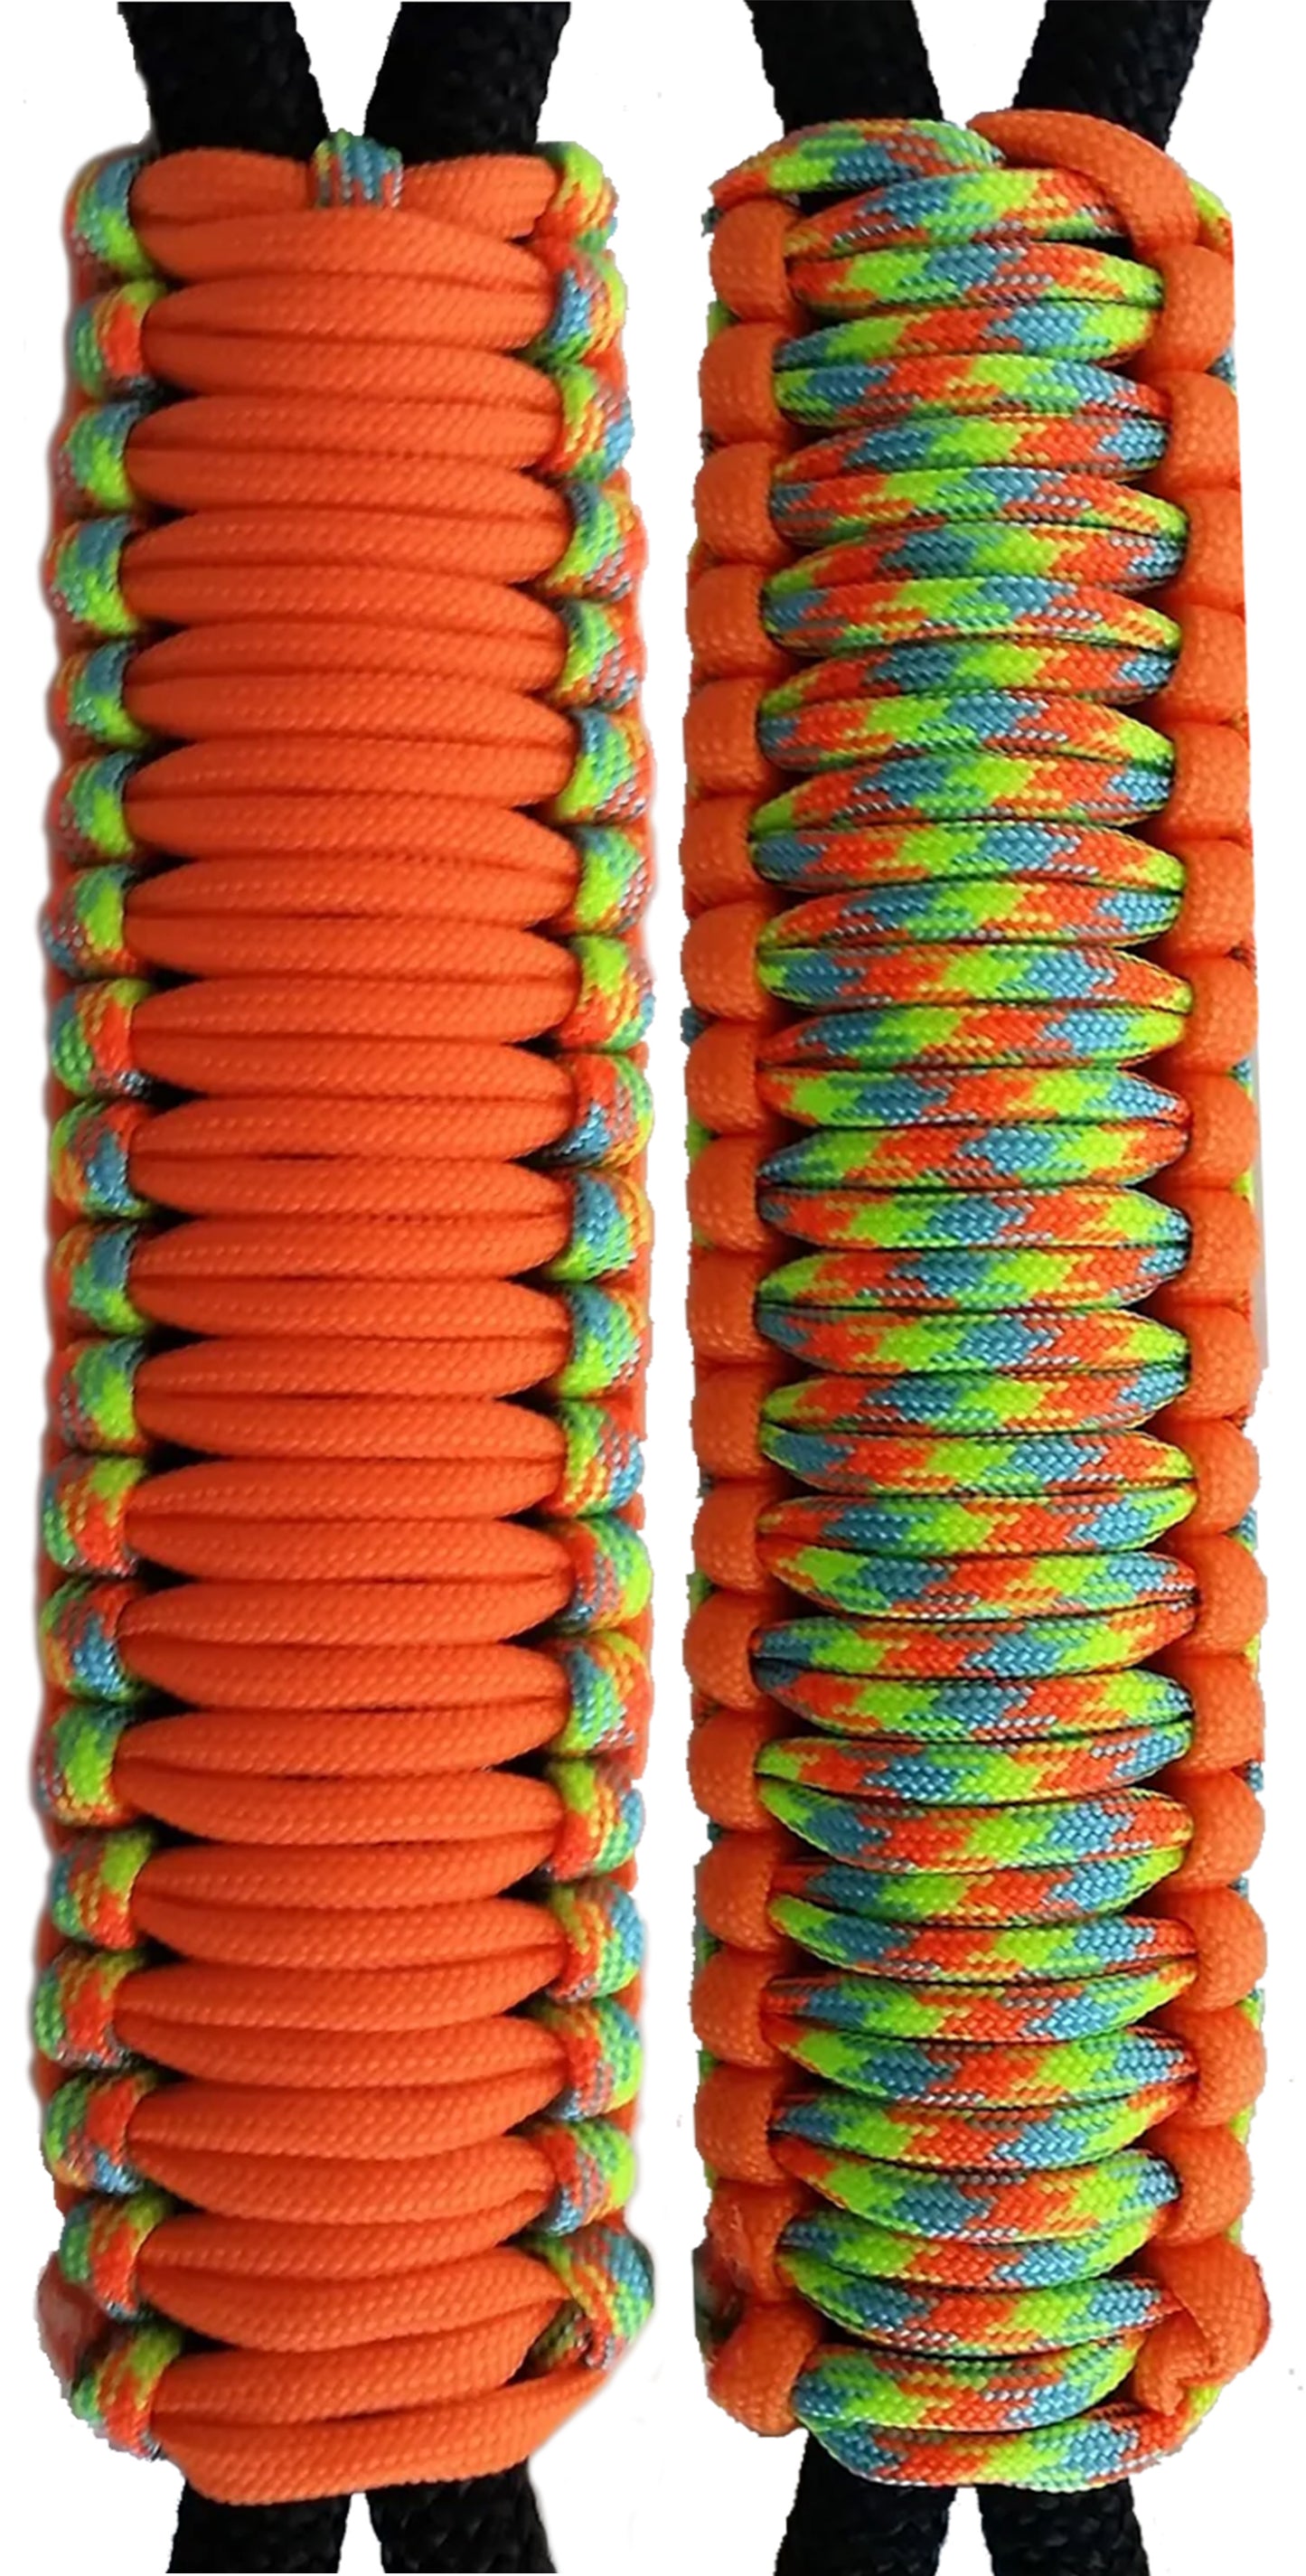 Neon Orange & Dragon Fly C002C072 - Paracord Handmade Handles for Stainless Steel Tumblers - Made in USA!